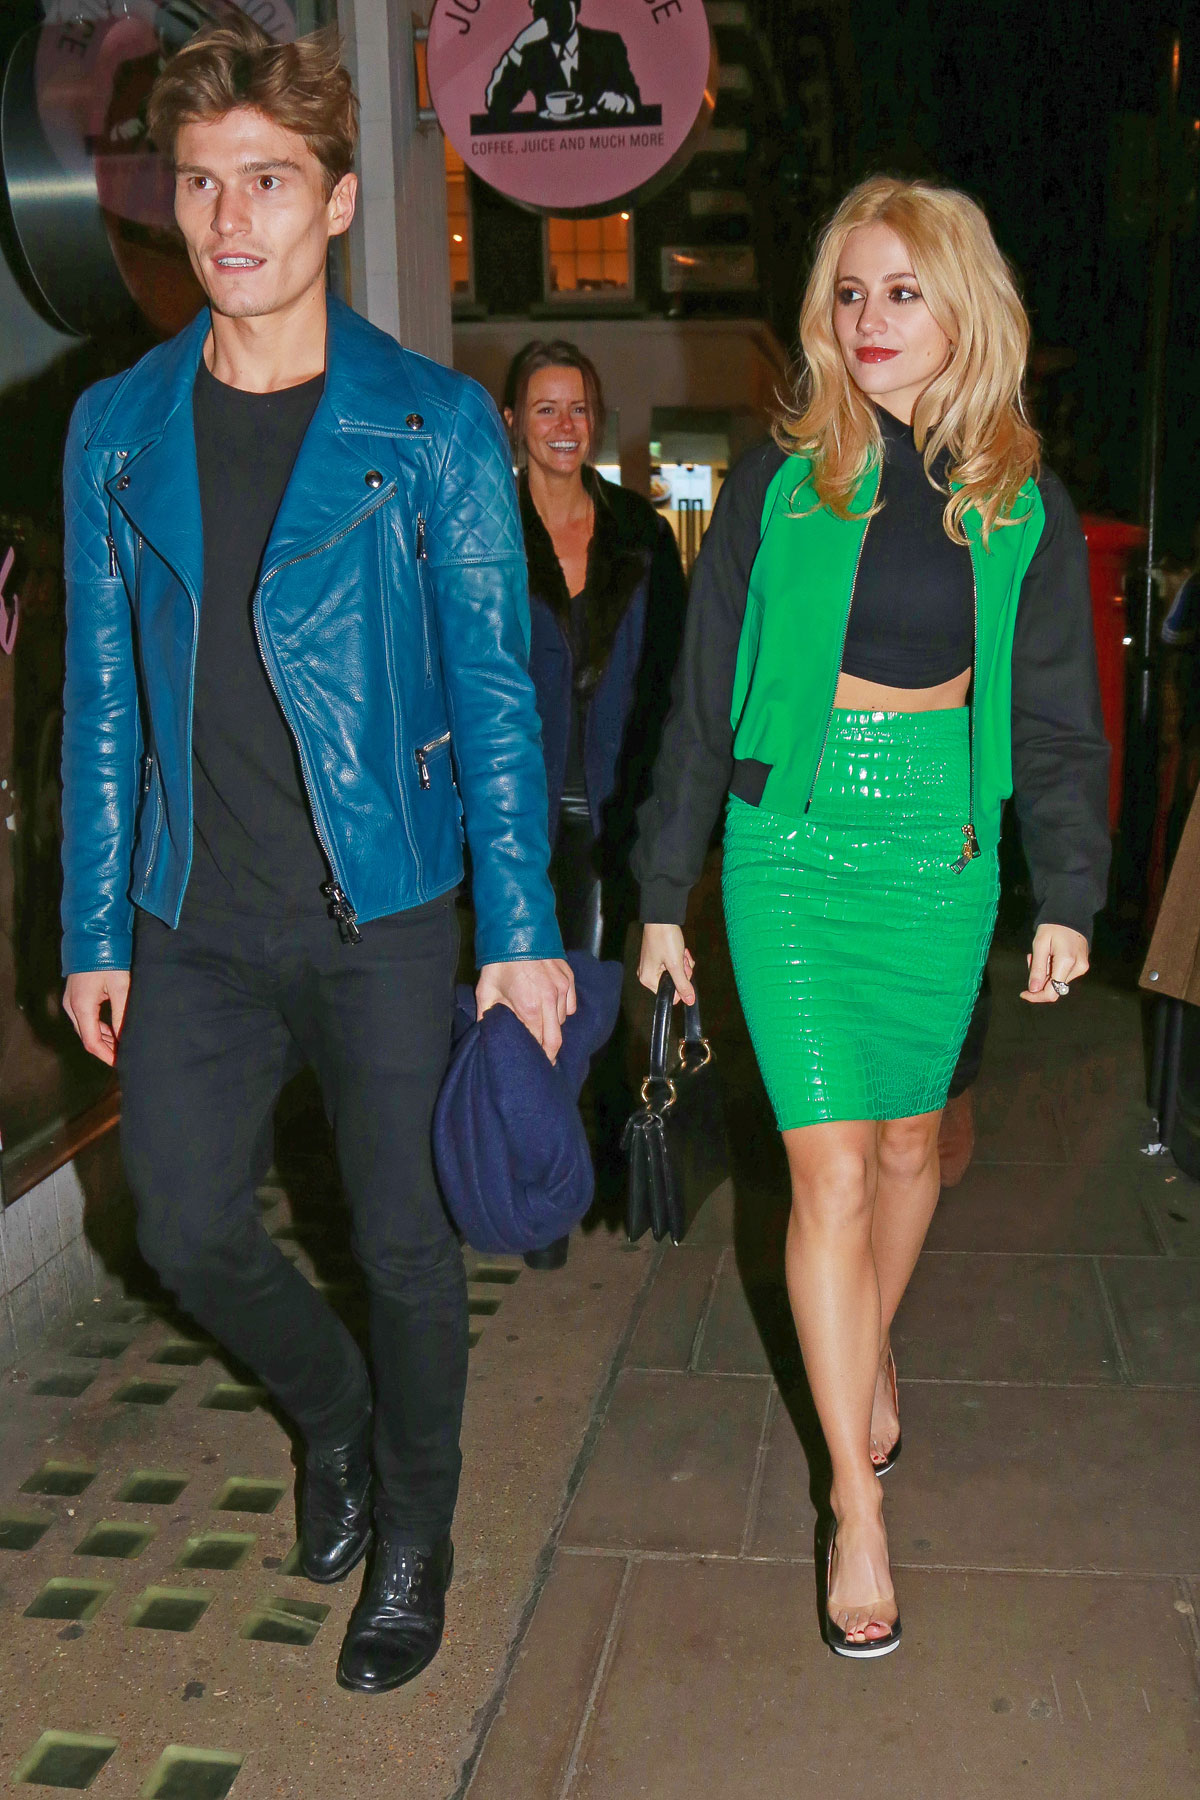 Pixie Lott Going to the Groucho Club